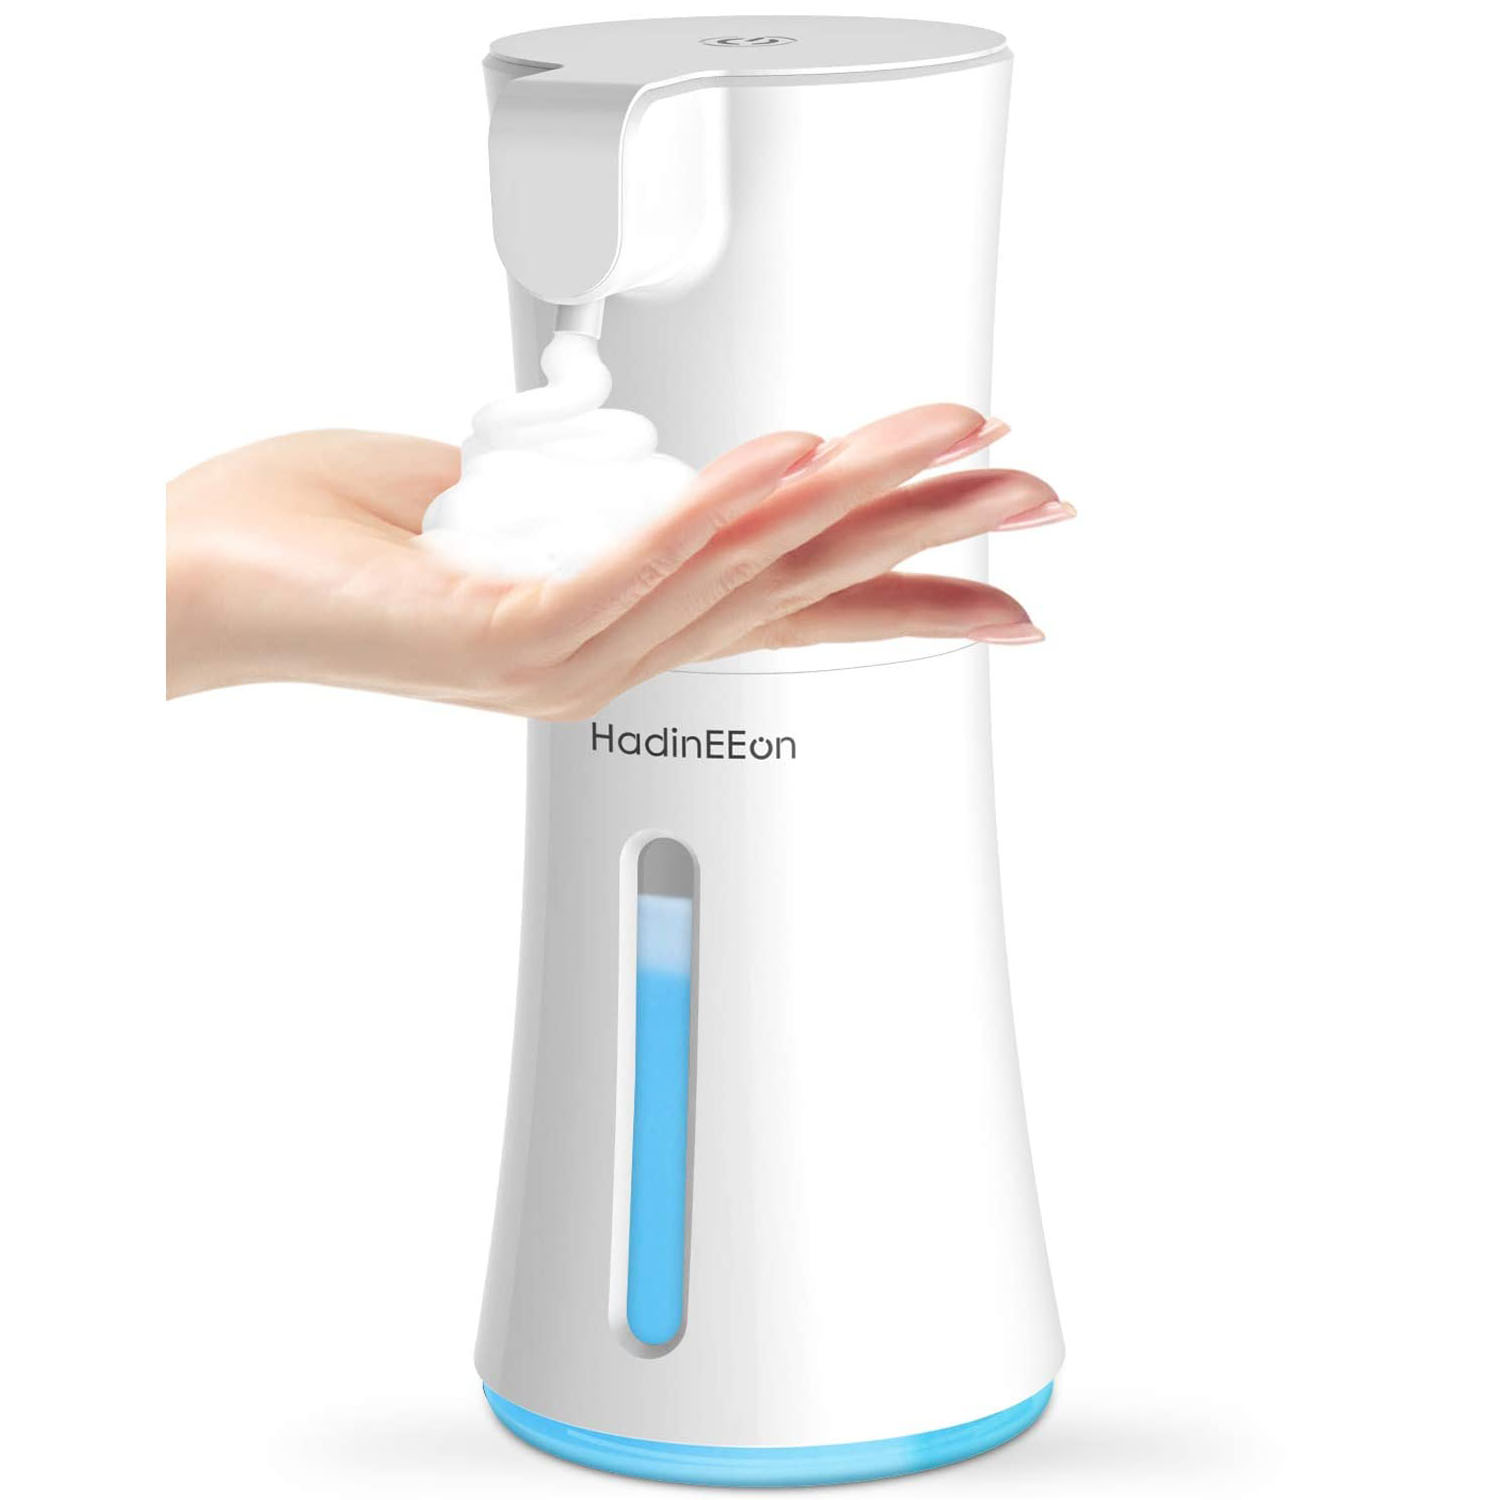 Automatic Foaming Soap Dispenser with Sensor for Kitchen, Bathroom (350ml for 600 hand washes) - image 1 of 8